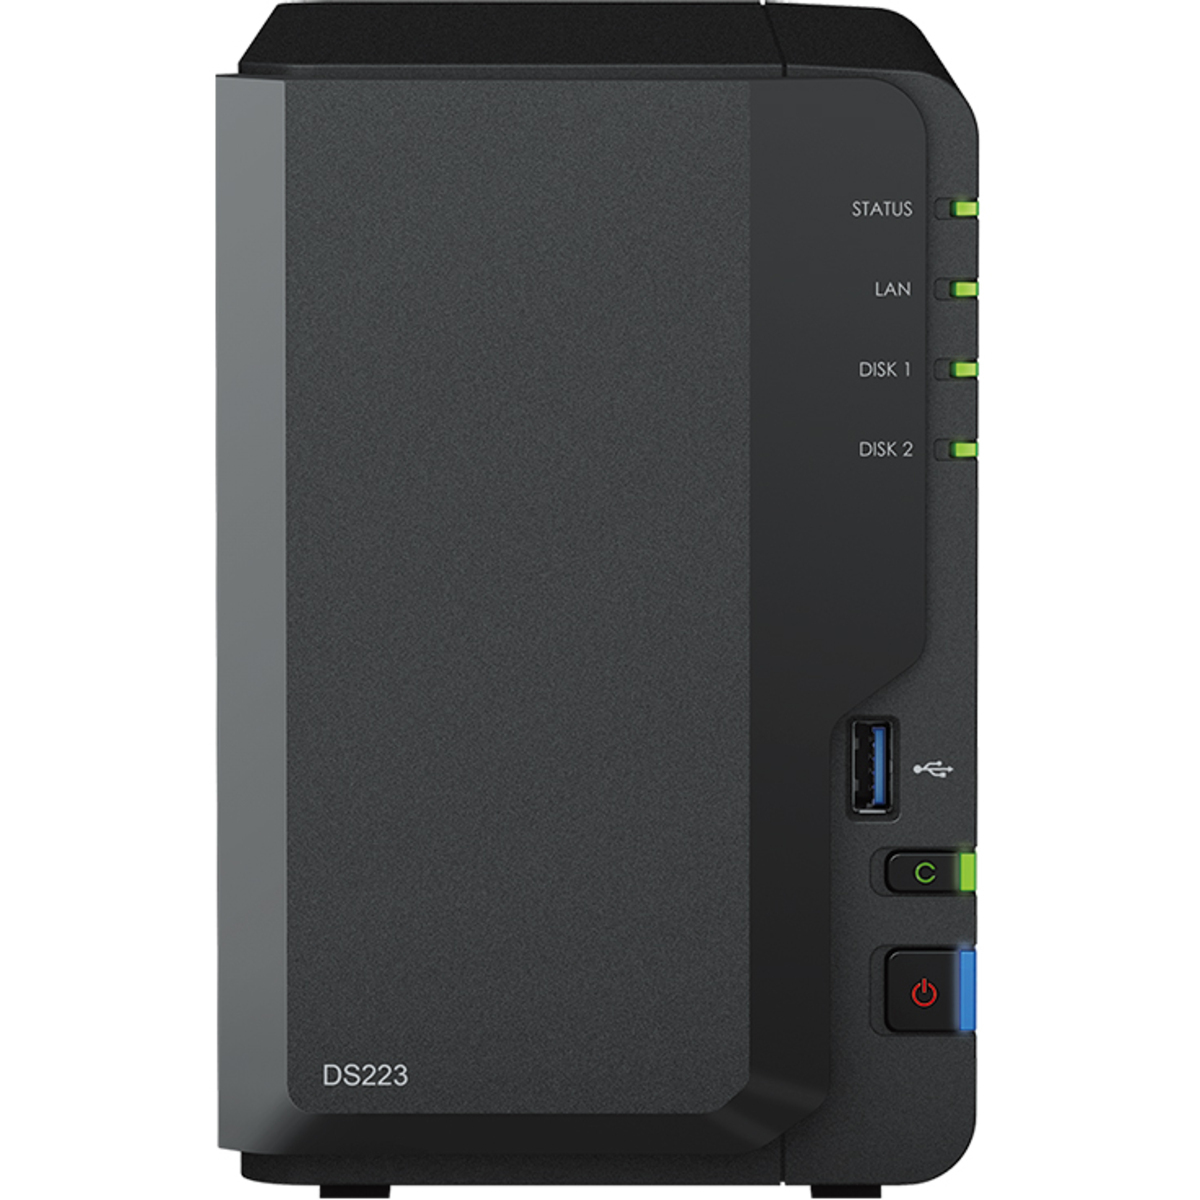 Synology DiskStation DS223 28tb 2-Bay Desktop Personal / Basic Home / Small Office NAS - Network Attached Storage Device 2x14tb Western Digital Ultrastar DC HC530 WUH721414ALE6L4 3.5 7200rpm SATA 6Gb/s HDD ENTERPRISE Class Drives Installed - Burn-In Tested DiskStation DS223